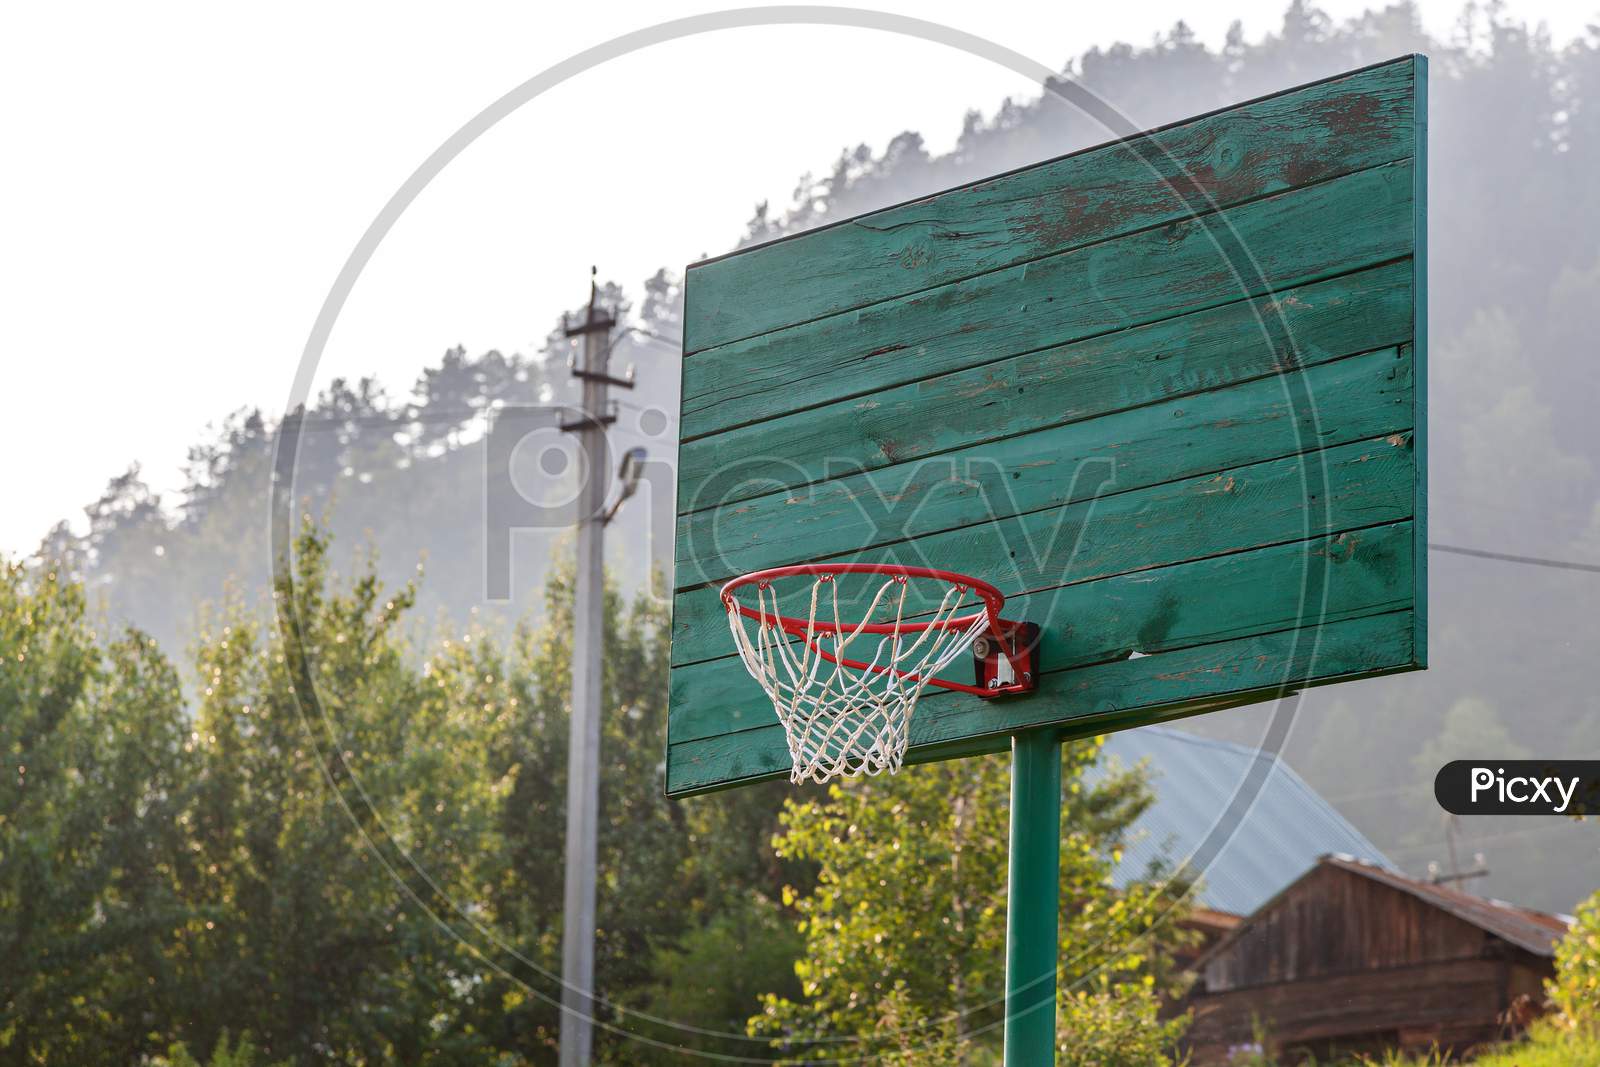 Basketball Green Old Ring With A Net For Playing Basketball Outdoors, In The Background A Green Forest On A Warm Summer Day